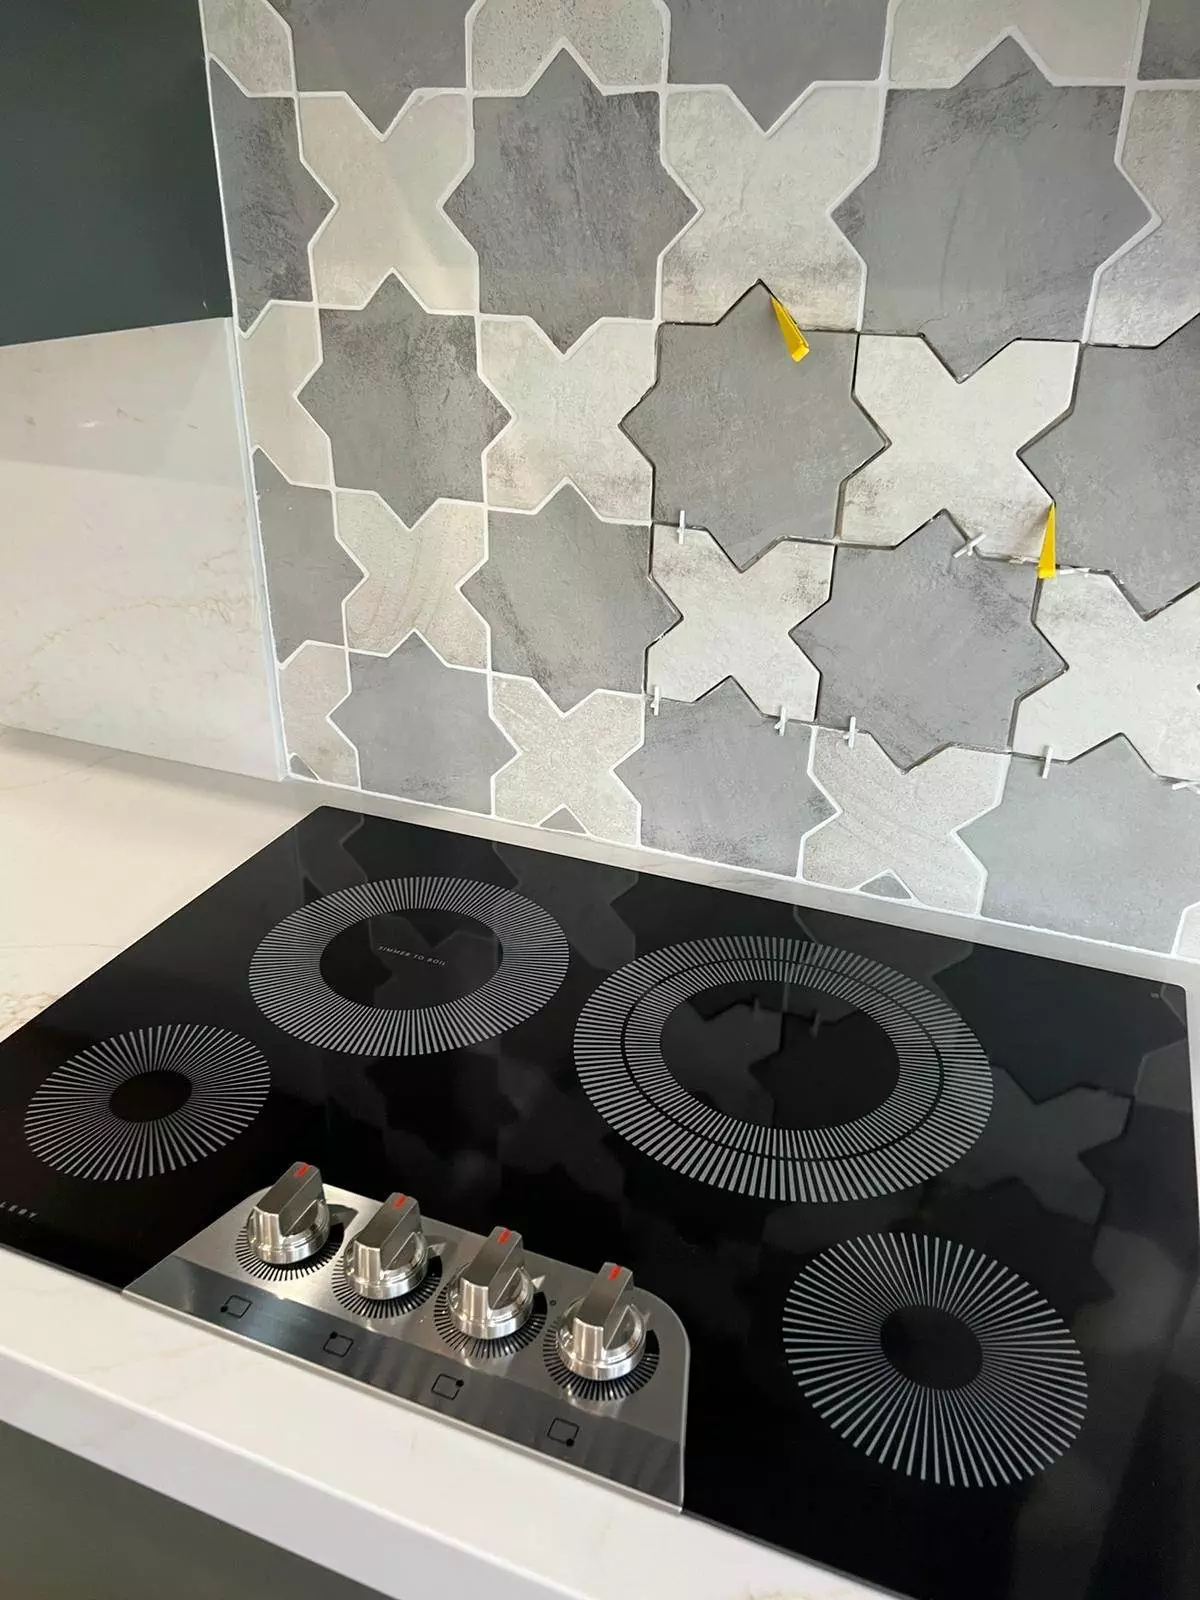 Electric stovetop with touch controls in a modern kitchen with hexagonal tile backsplash.